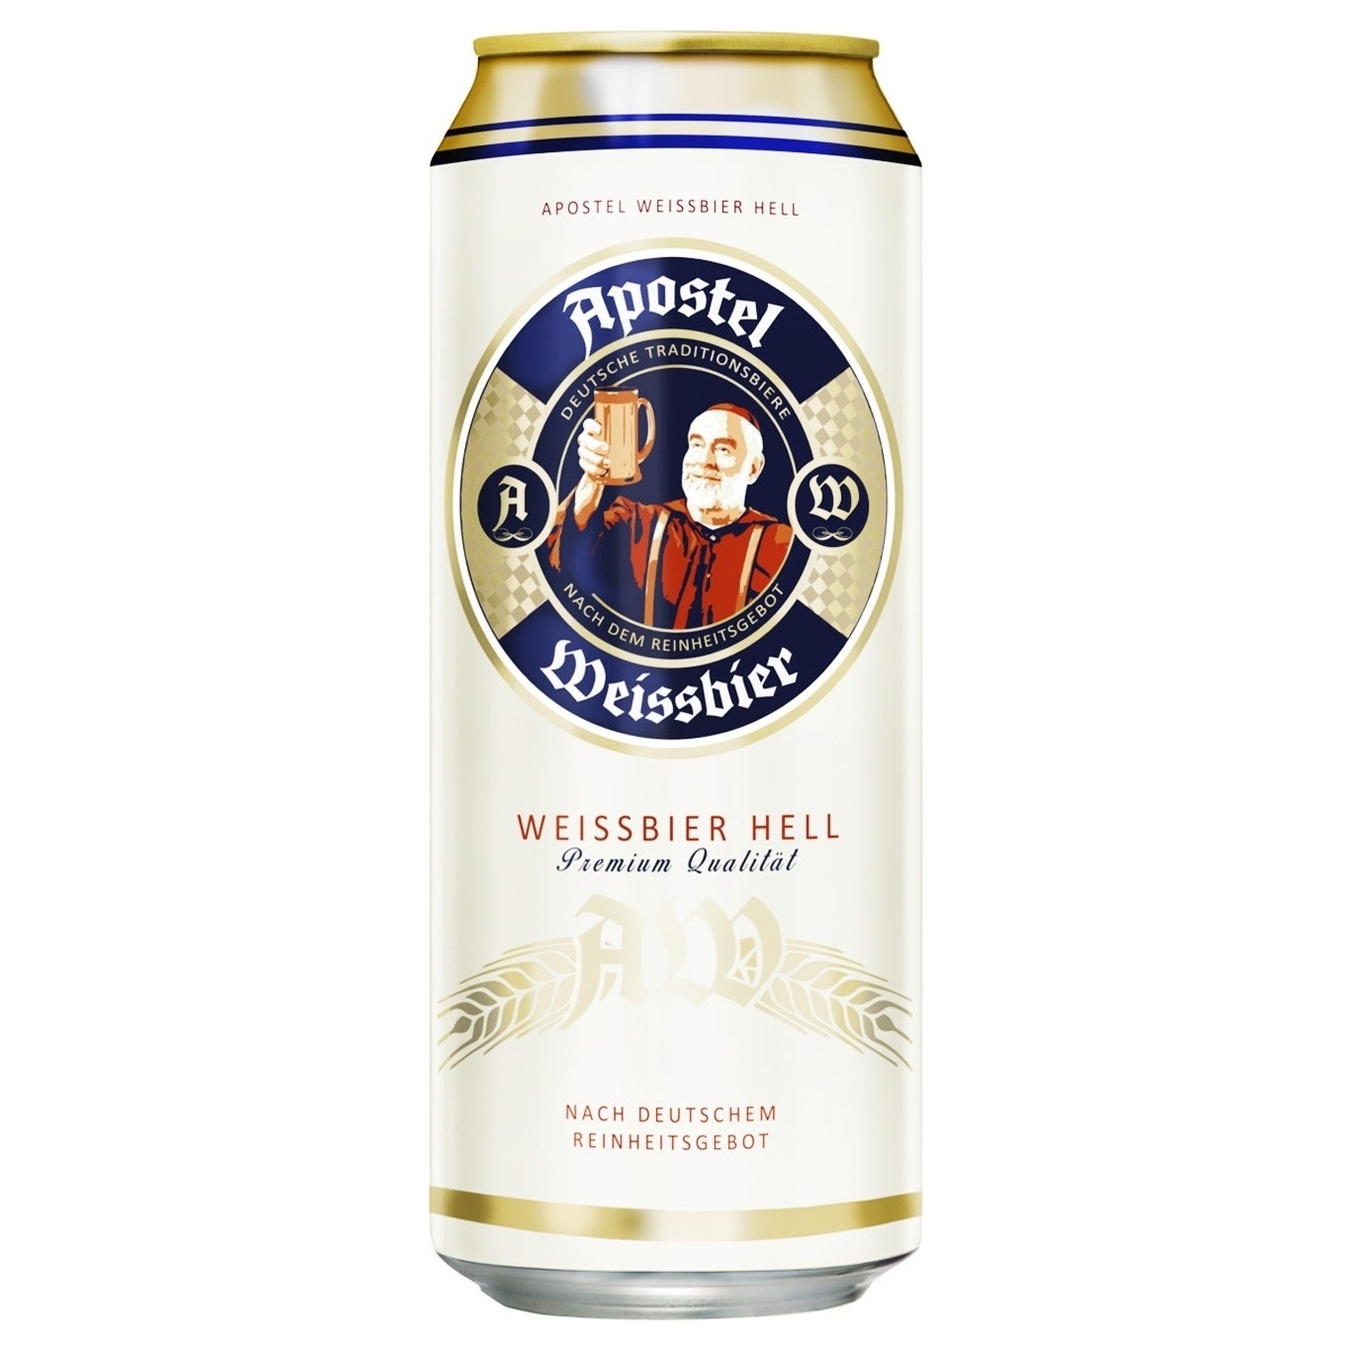 Beer Apostel Hefeweissbier unfiltered 5.3% 0.5 l iron can